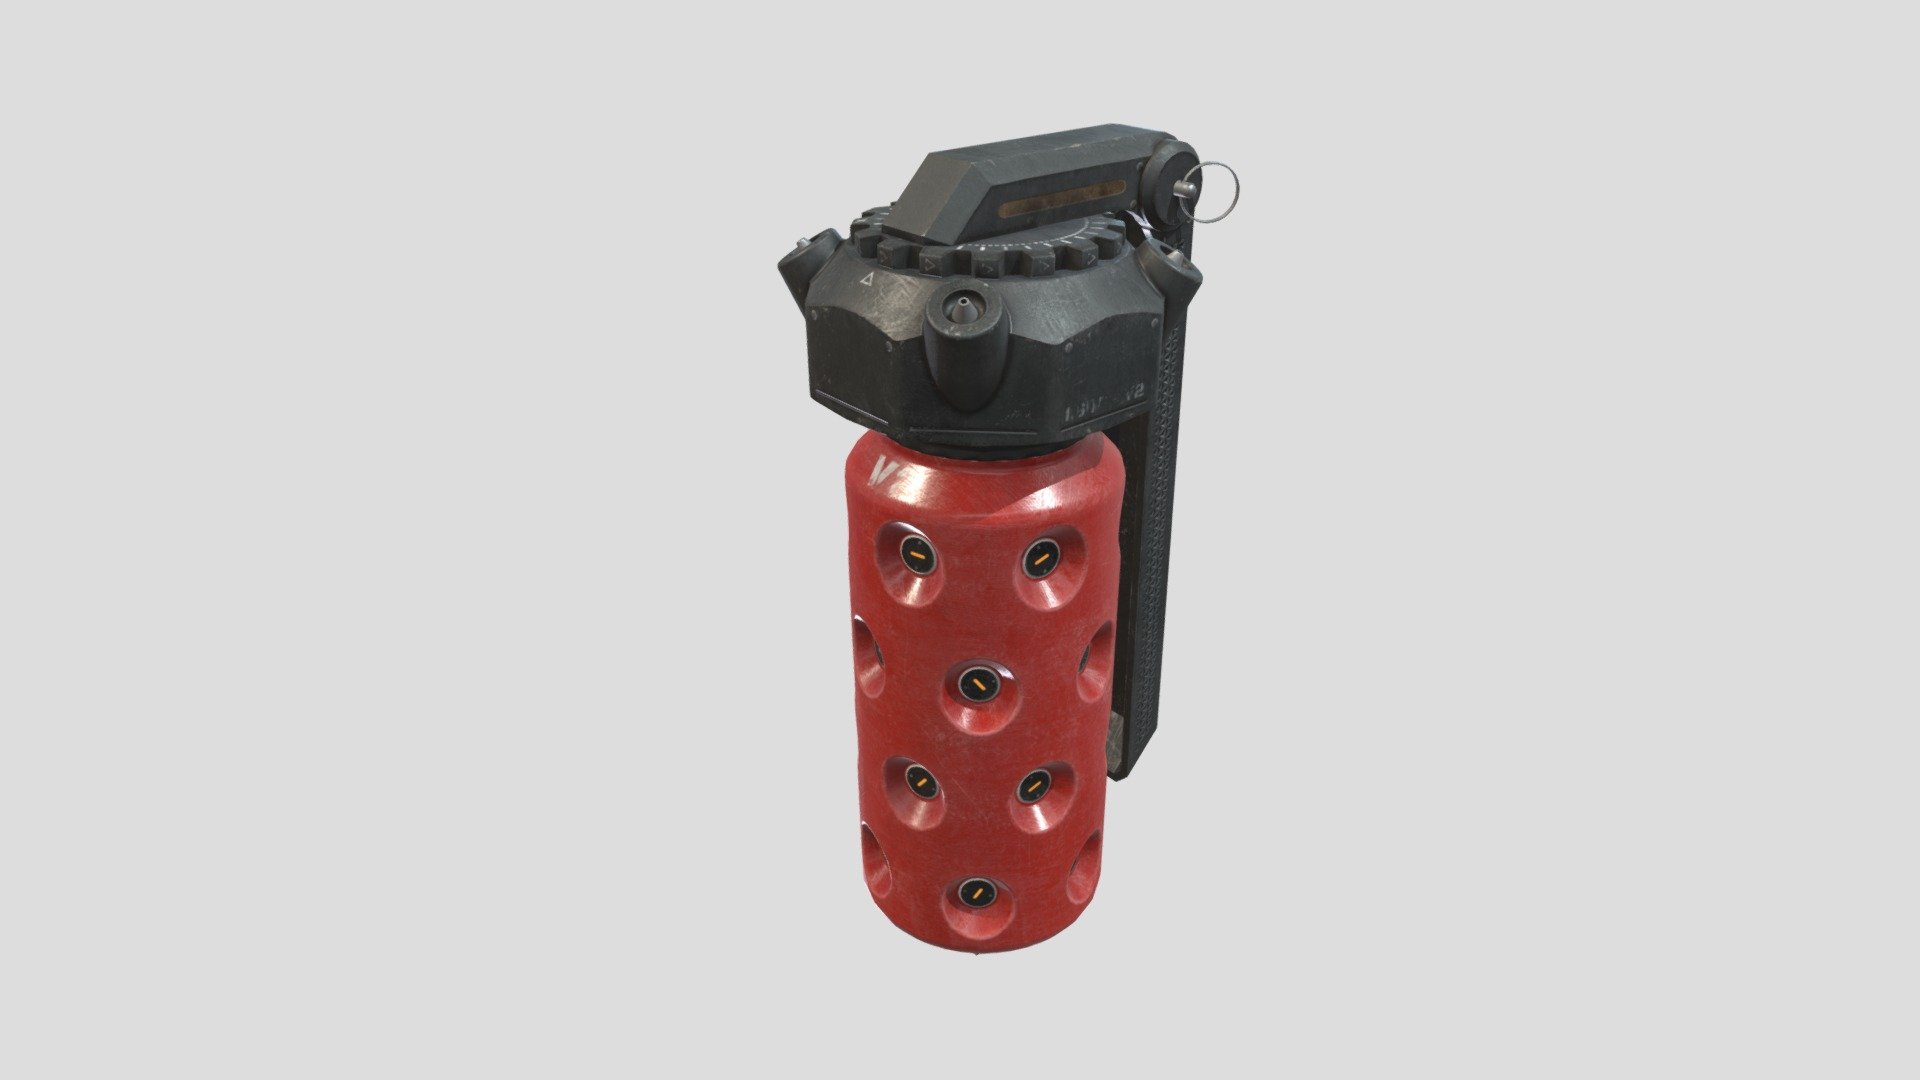 This Sci-fi Flashbang Grenade is a great model for use in any military, action, or battle scene. The model is Highly Detailed and Seperated into different meshes for easy animation. The model is viewable from all angles and distances. The Canister at the bottom can be seperated into its own texture group and adjusted with a hue saturation value node to create any color grenade you want !

This Includes:

The Mesh (7 Parts of the Grenade)
4K and 2K Texture Set (Albedo, Metallic, Roughness, Normal, Height)
The mesh is UV Unwrapped with vertex colors for easy retexturing 3d model